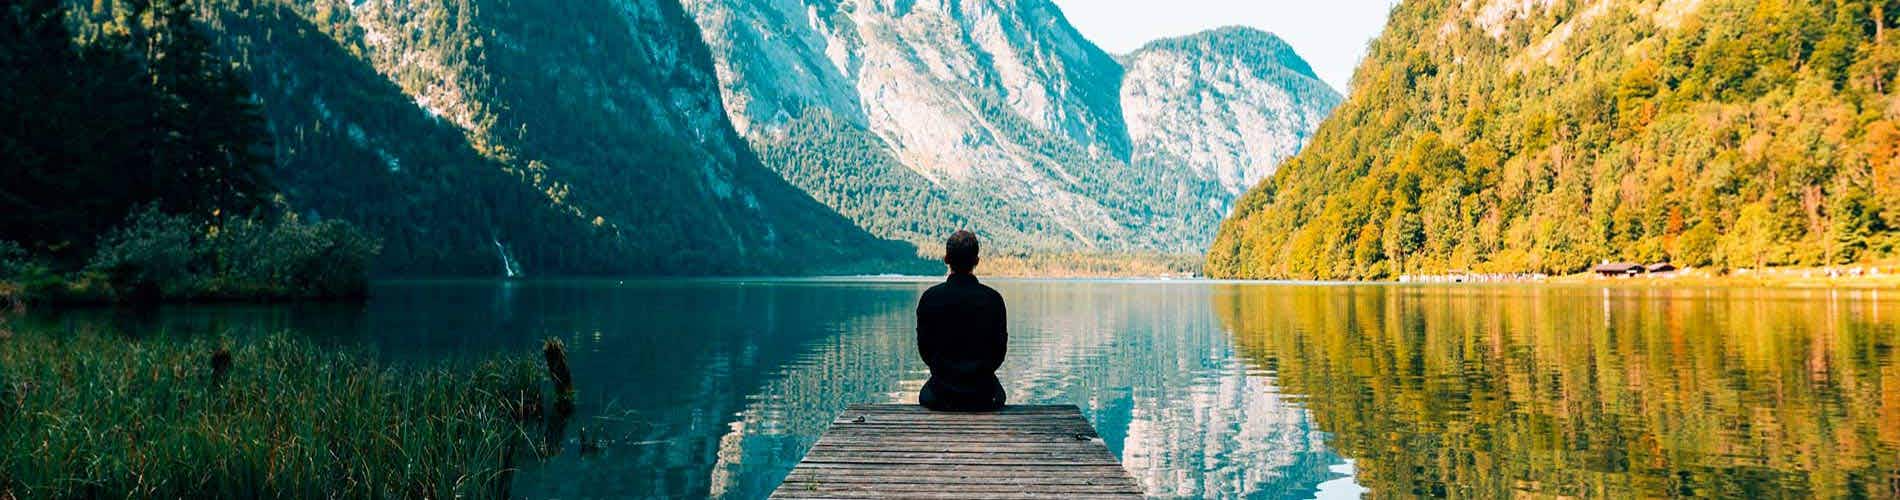 Mindfulness Holidays: What You Must Know Before You Go